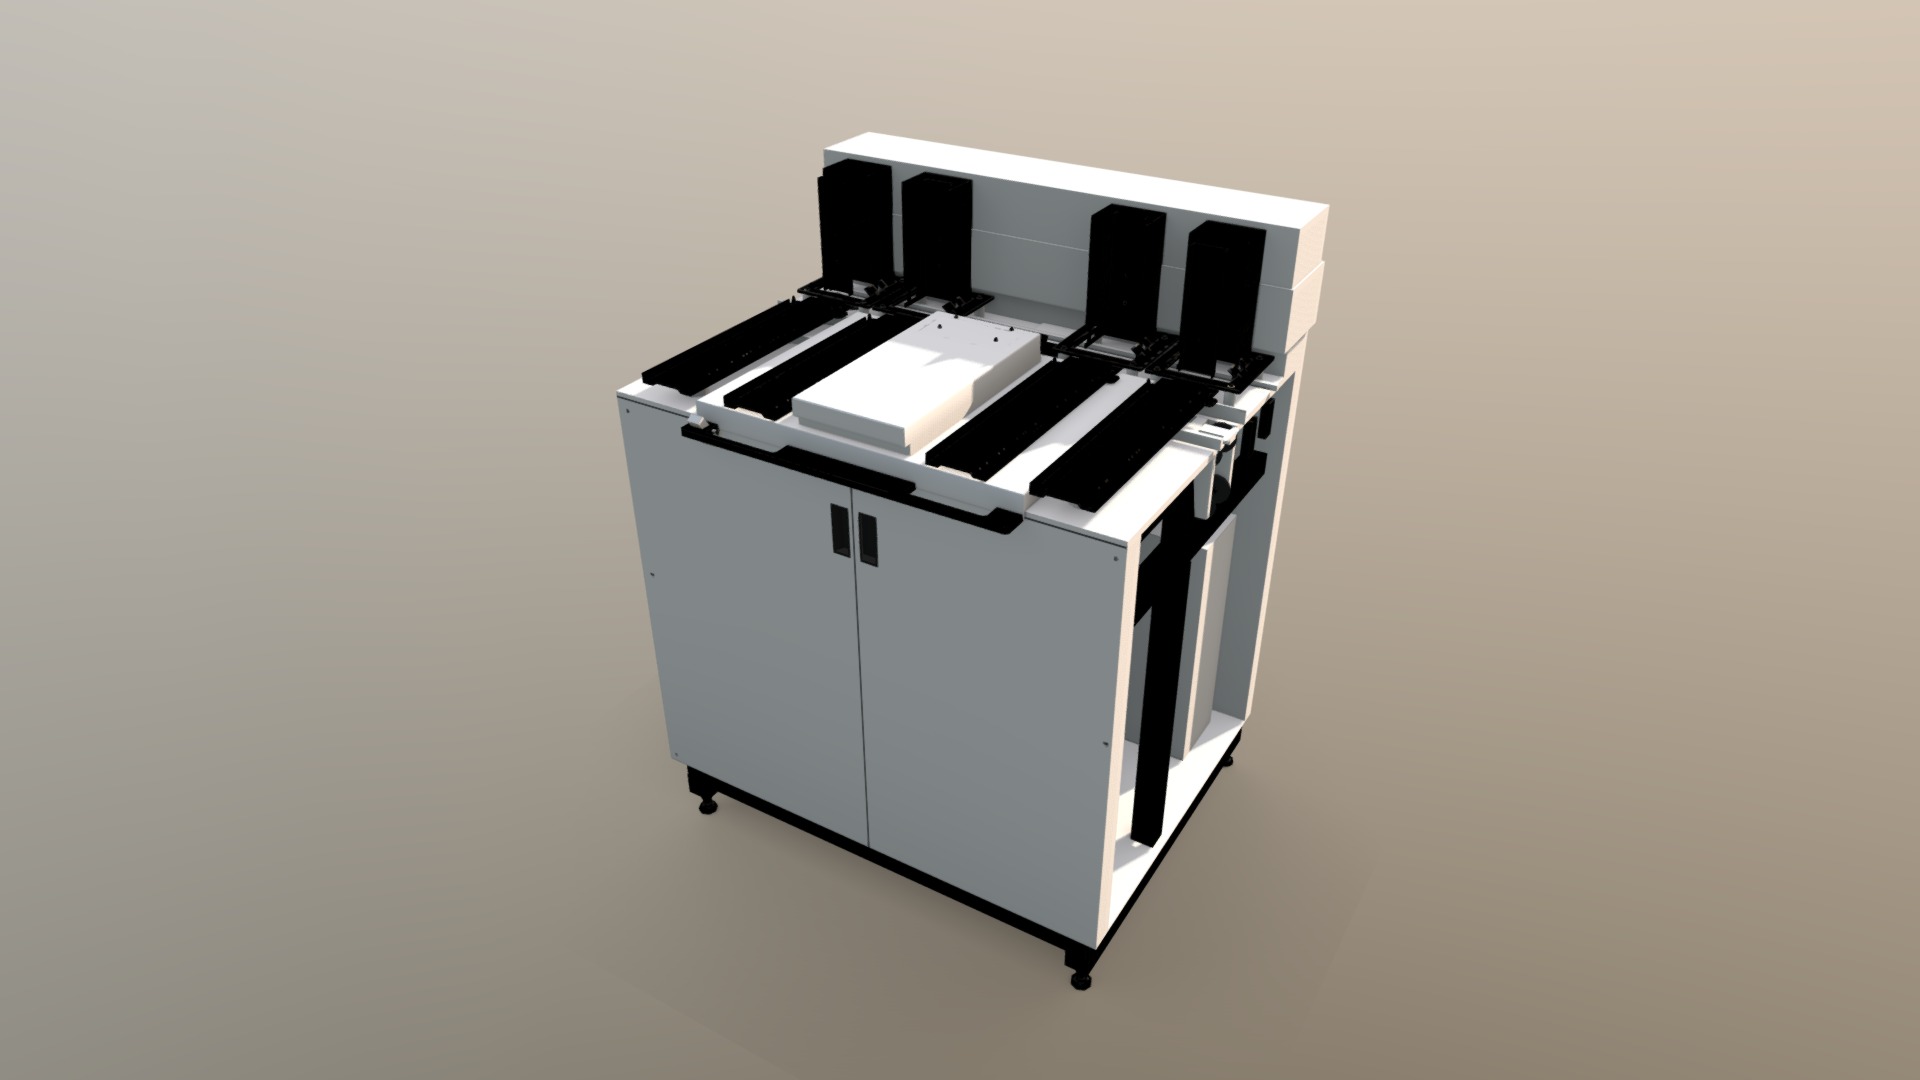 3D model Module 2 - This is a 3D model of the Module 2. The 3D model is about a black and white piano.